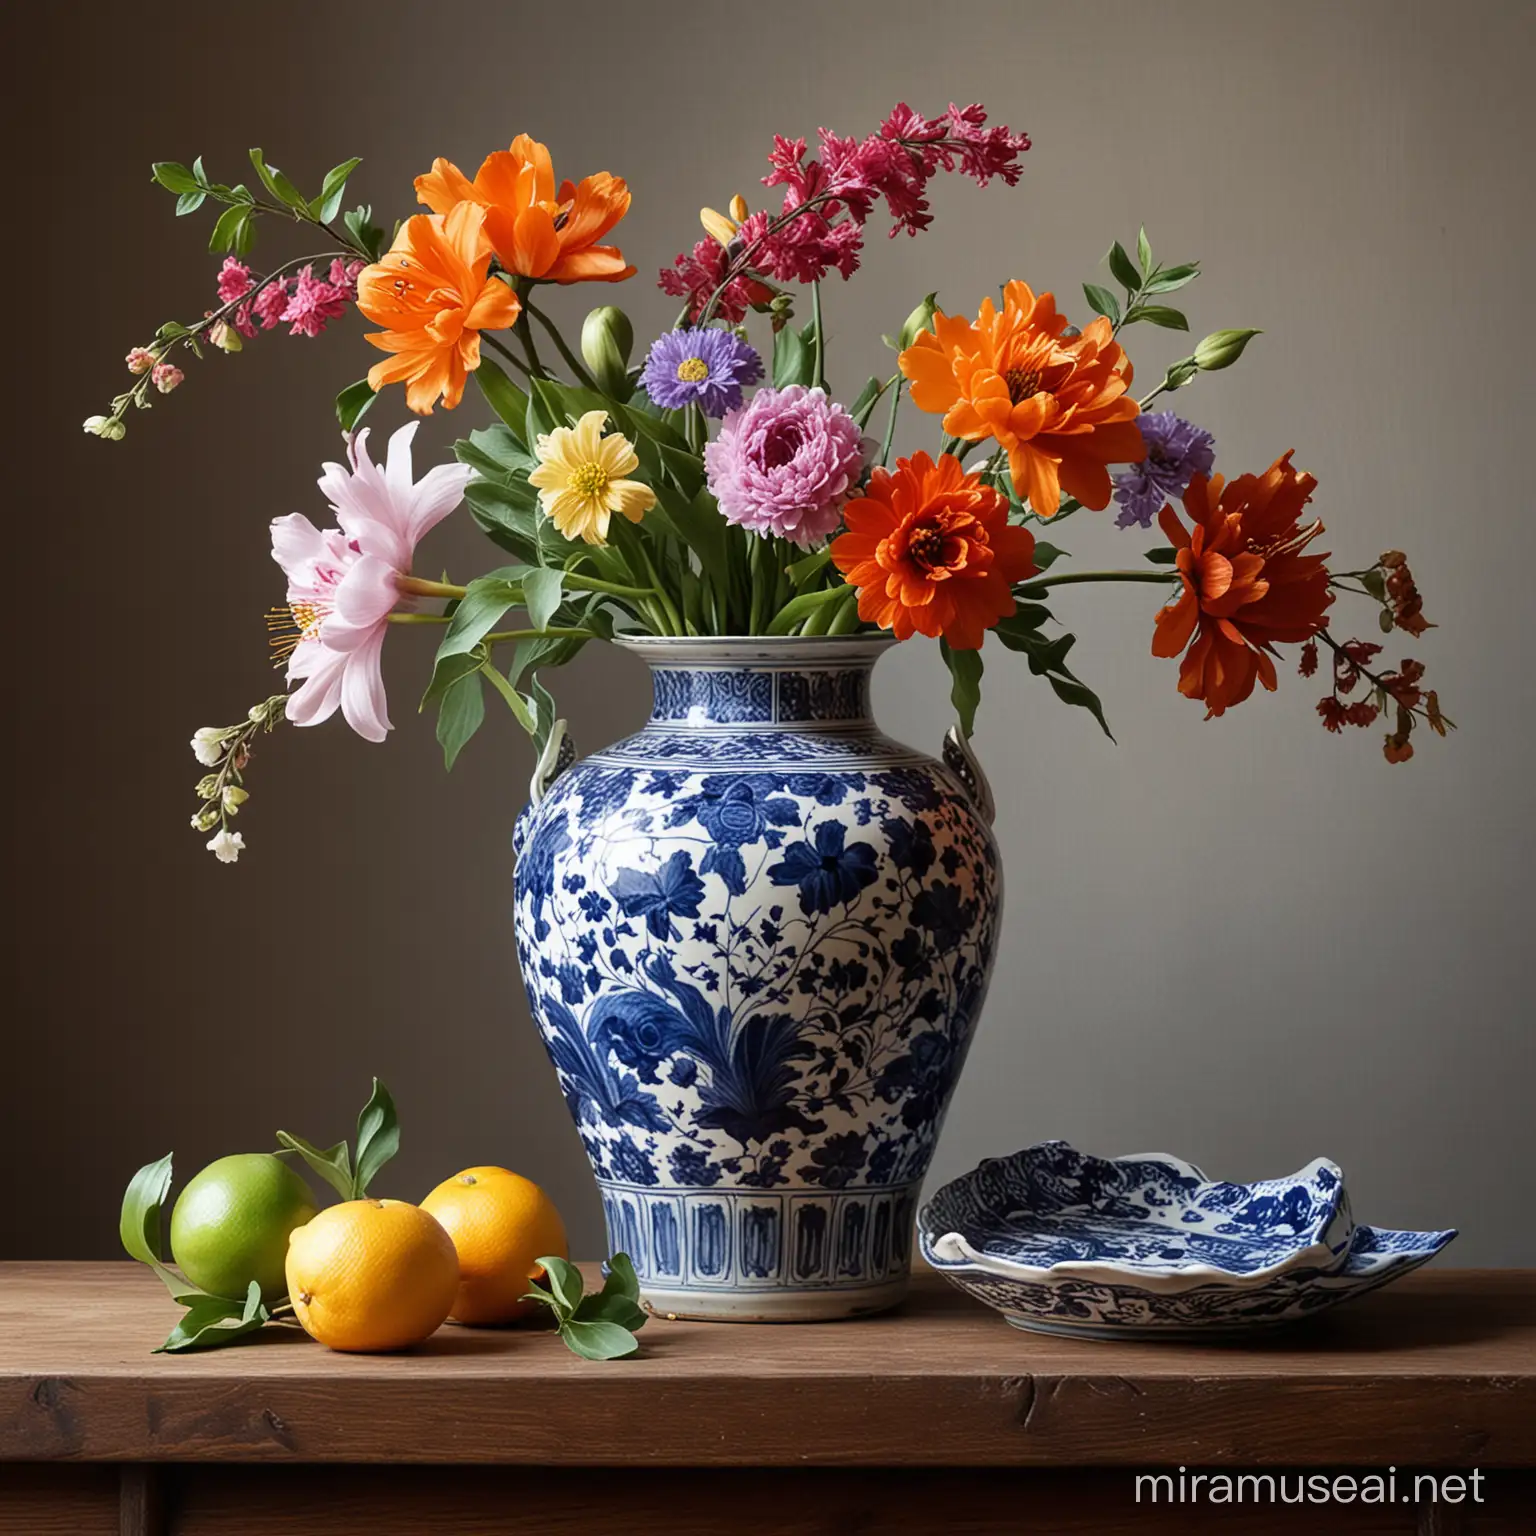 dutch still life with asian ceramic vase with flowers